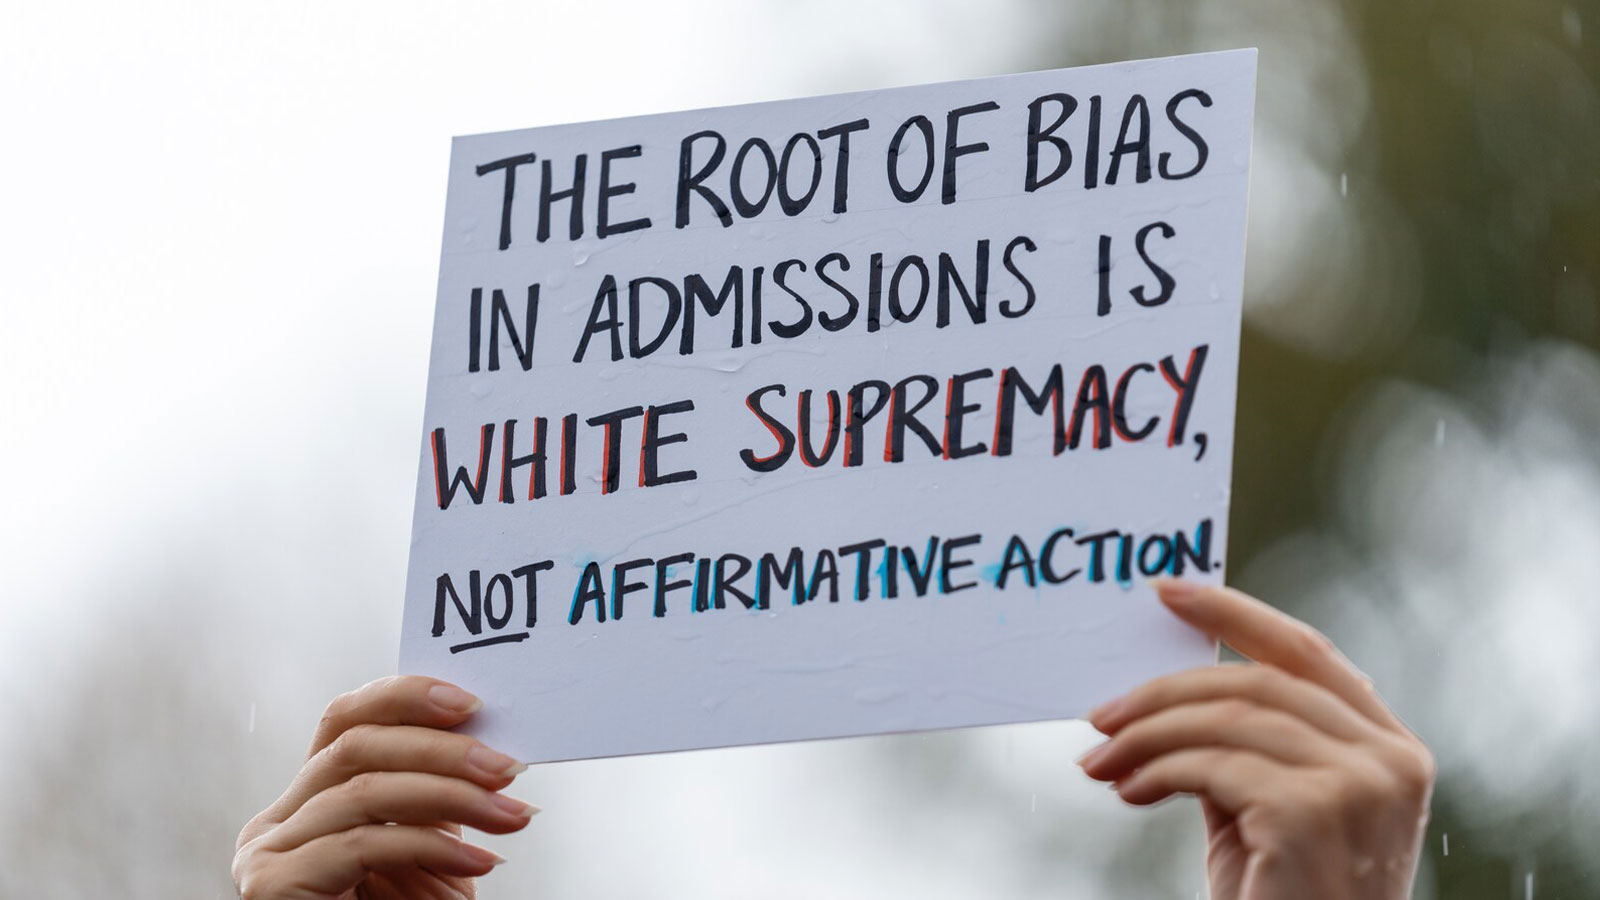 White women have helped sink the affirmative action ship